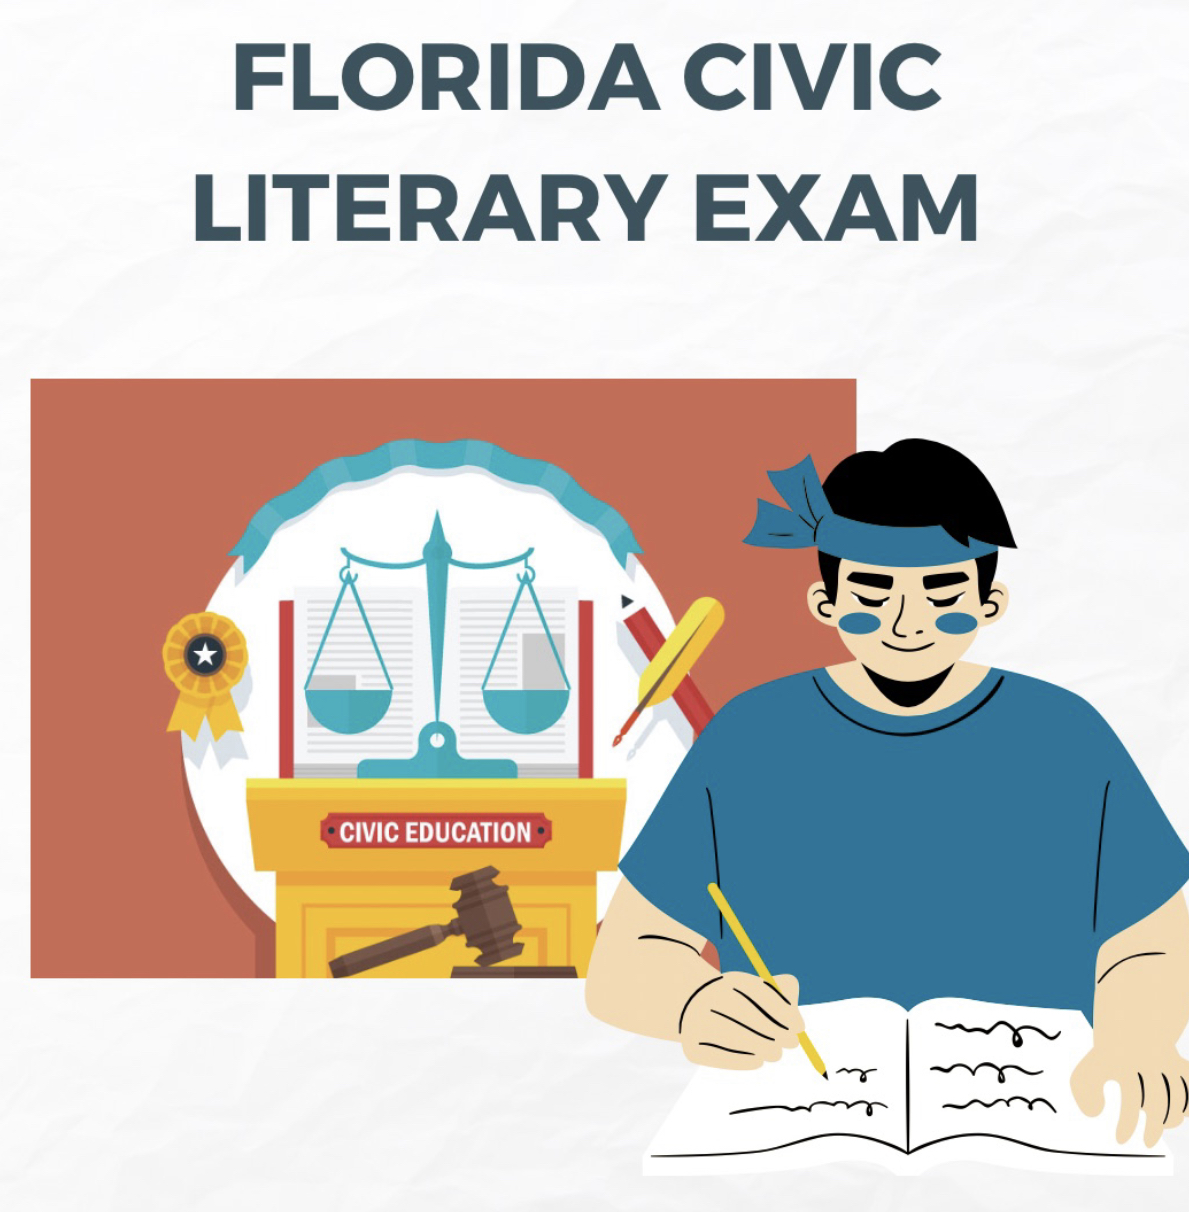 FCLE stands for The Florida Civic Literary Exam.